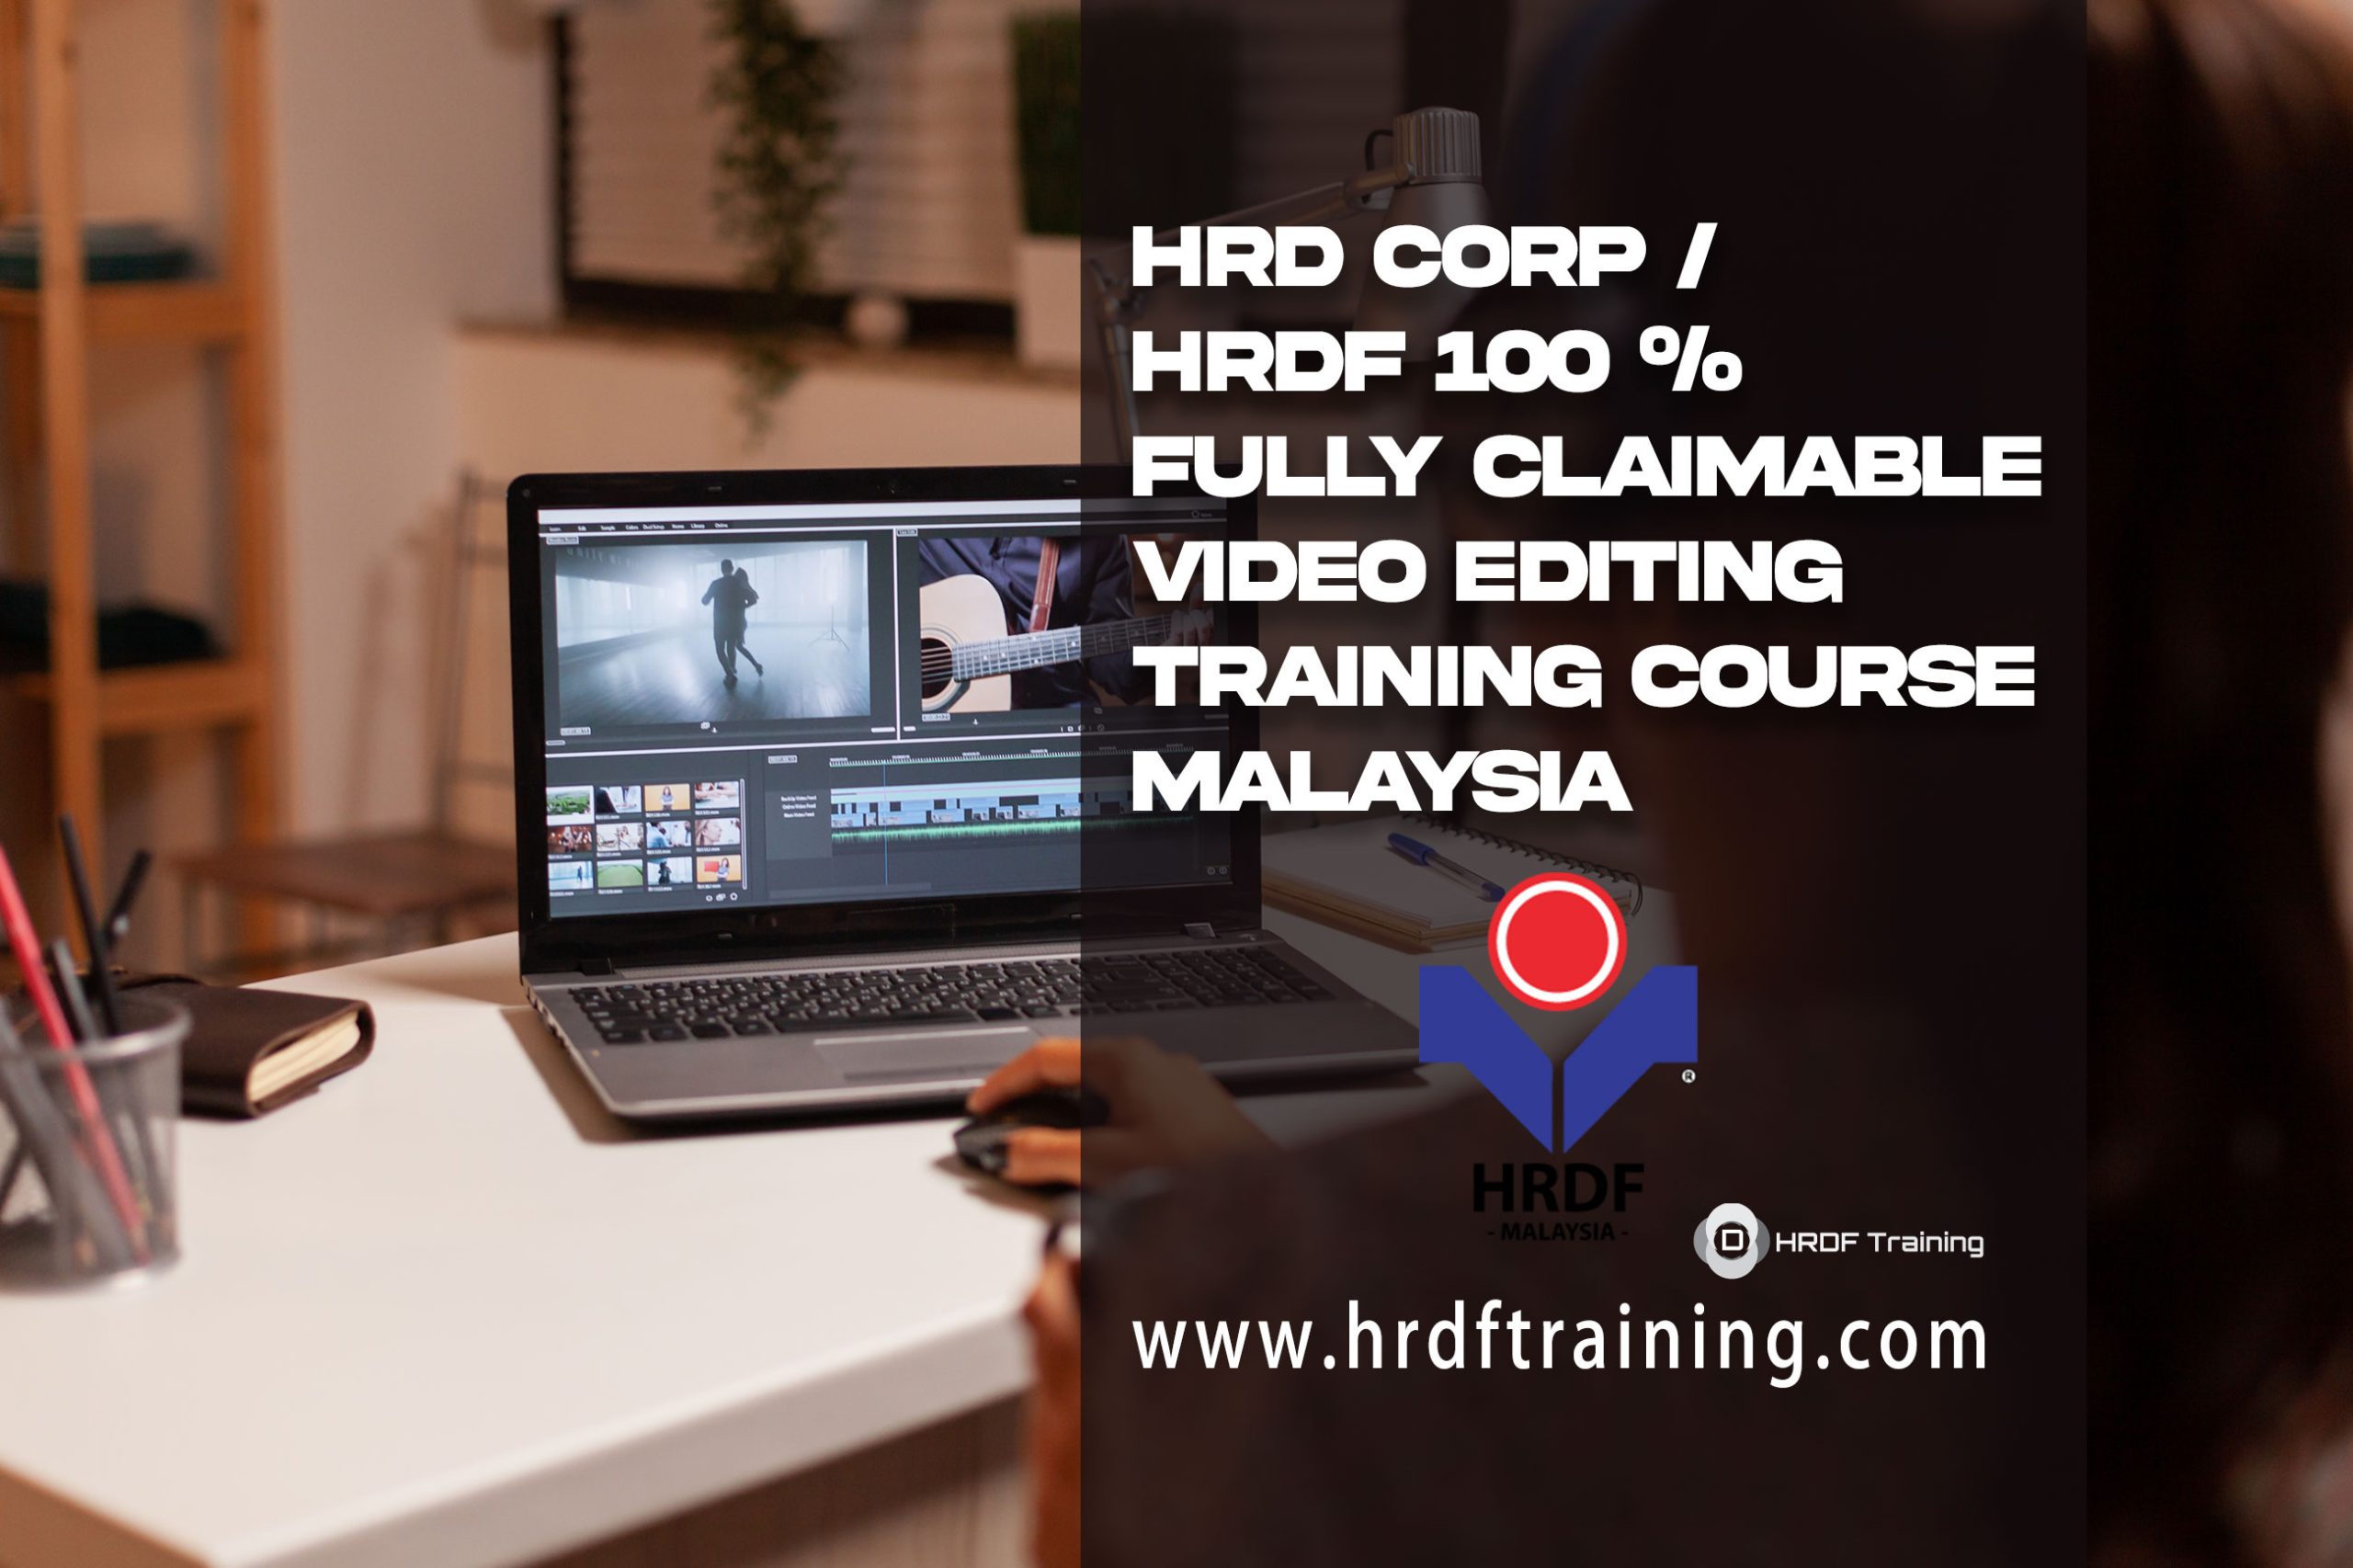 HRDF HRD Corp Claimable Video Editing Training Course Malaysia - April 2022